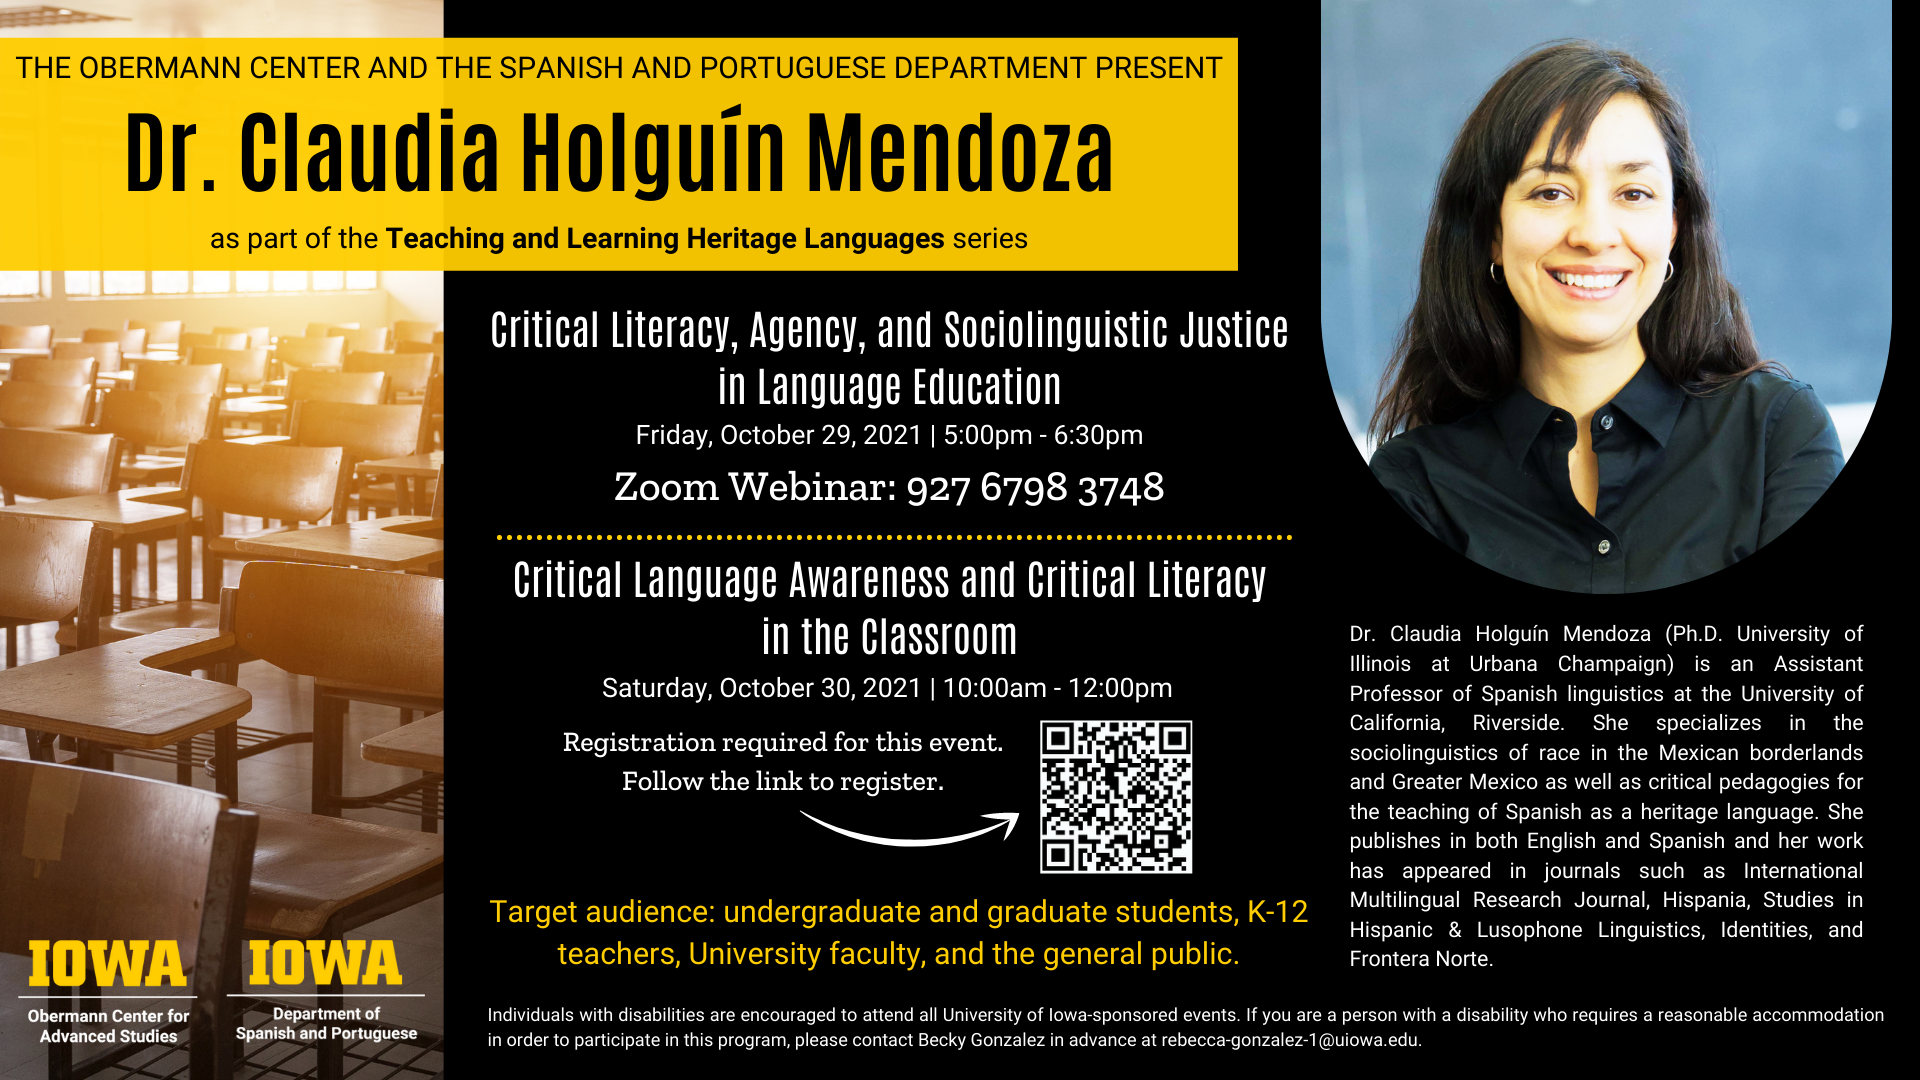 The Obermann Center and The Spanish and Portuguese Department Present Dr. Claudia Holguín Mendoza as part of the Teaching and Learning Heritage Languages series. She will be hosting two events. The first event is Critical Literacy, Agency, and Sociolinguistic Justice in Language Education on Friday, October 29, 2021 at 5:00pm - 6:30pm Zoom Webinar ID: 927 6798 3748. The second event is Critical Language Awareness and Critical Literacy in the Classroom on Saturday, October 30, 2021 at 10:00am - 12:00pm. Register for this event at https://uiowa.qualtrics.com/jfe/form/SV_0ilD82UaGJWlynA?Q_CHL=qr